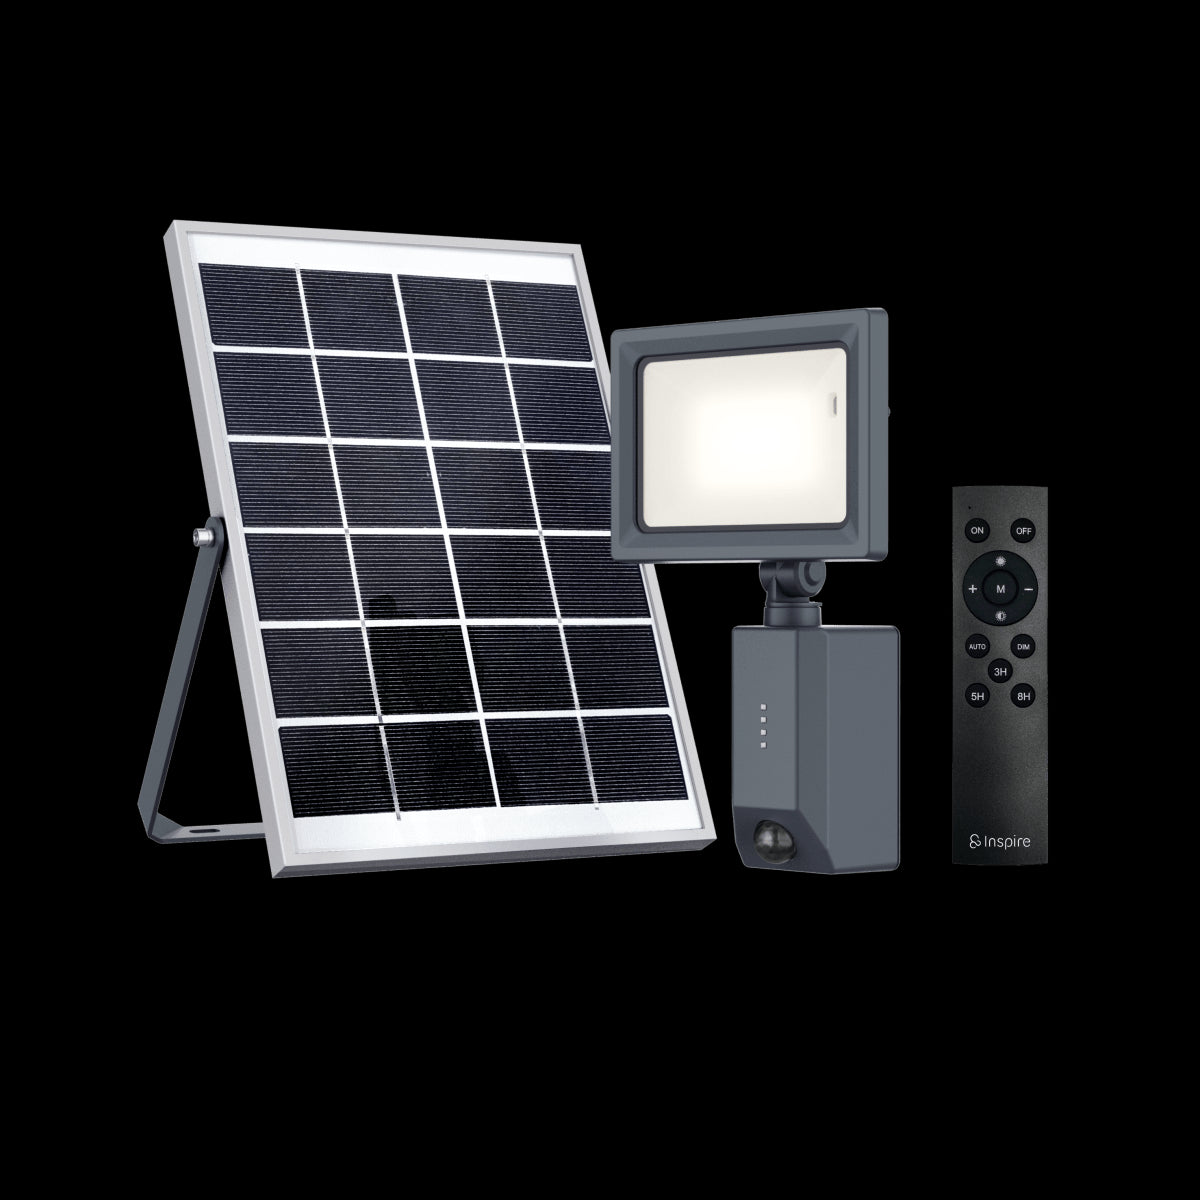 YONKERS SOLAR PROJECTOR PLASTIC BLACK LED 126W NATURAL LIGHT IP54